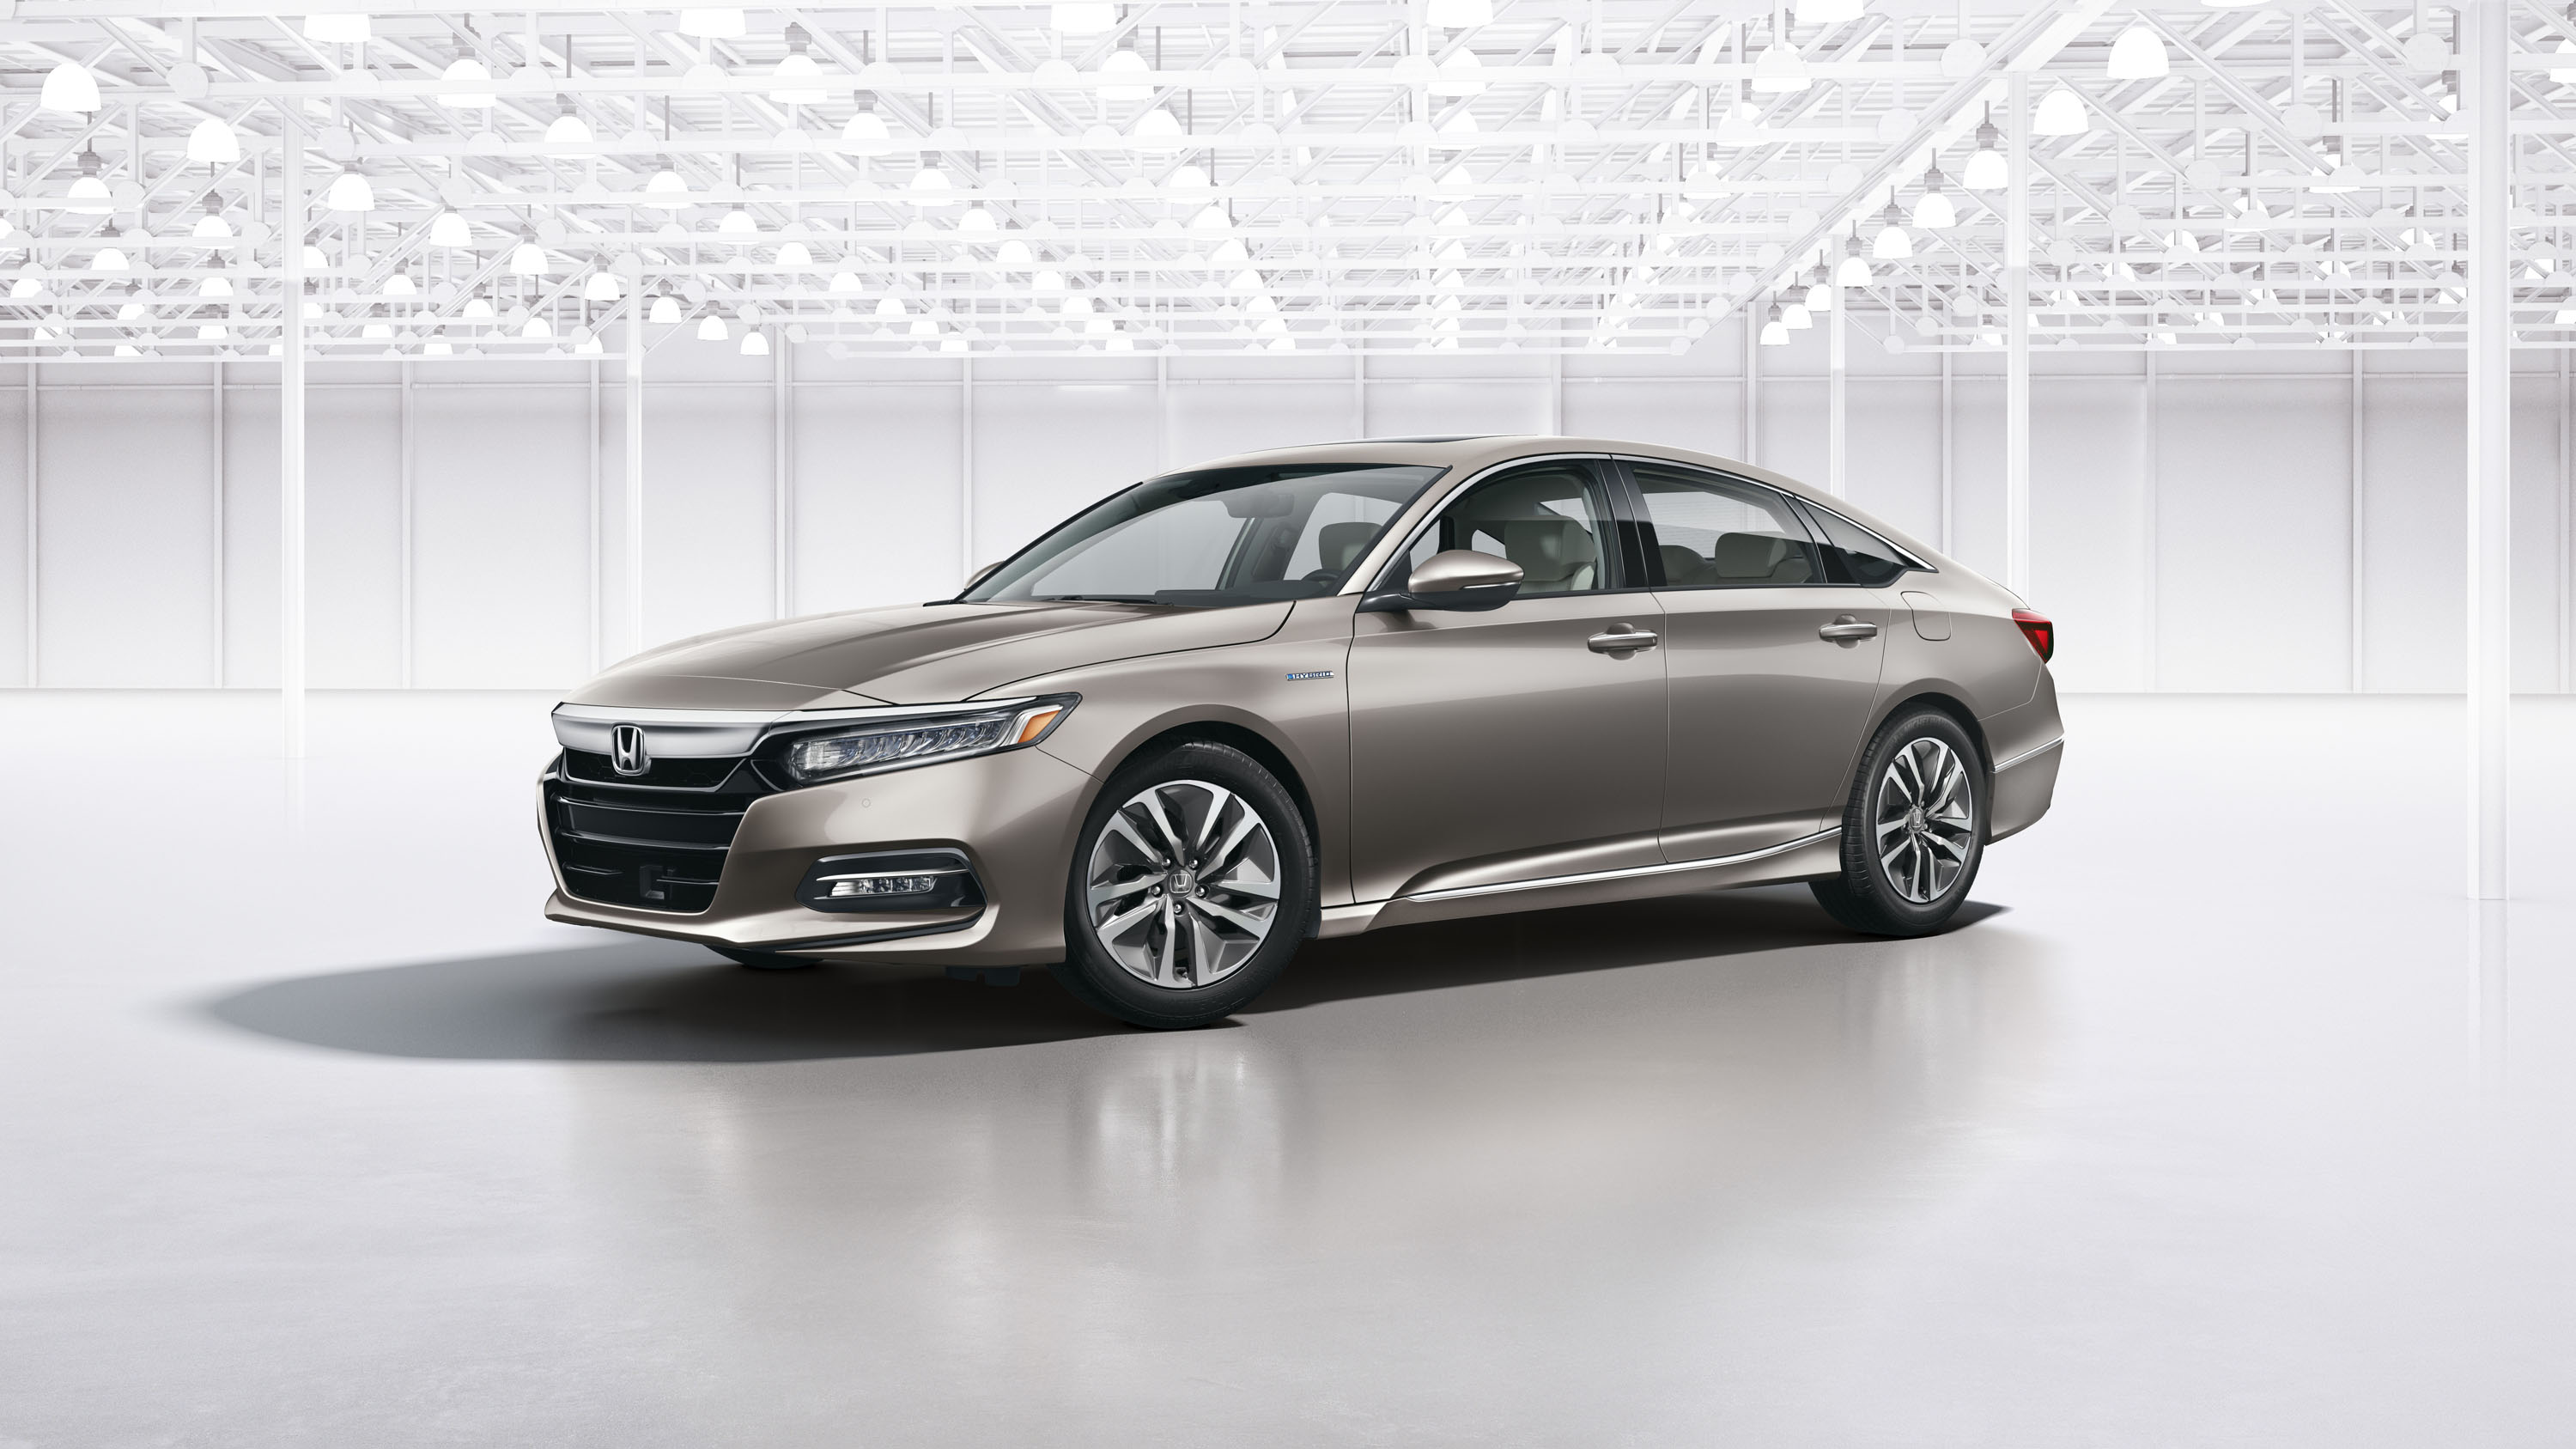 2018 Honda Accord Hybrid: more trunk space, higher fuel economy promised